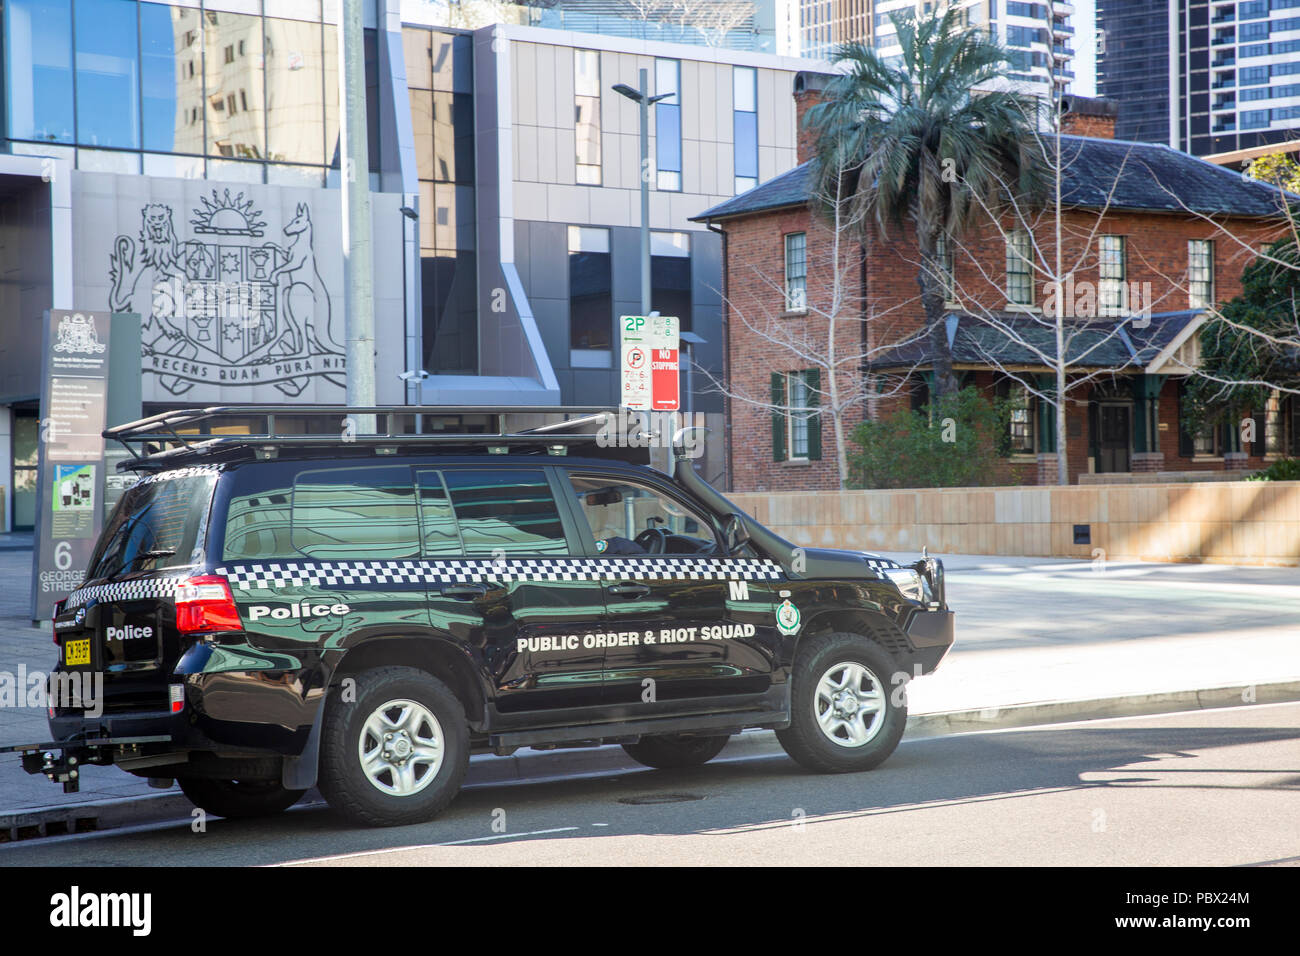 New South Wales Public order and riot squad police in a parked toyota in Parramatta city centre,Western Sydney,Australia Stock Photo